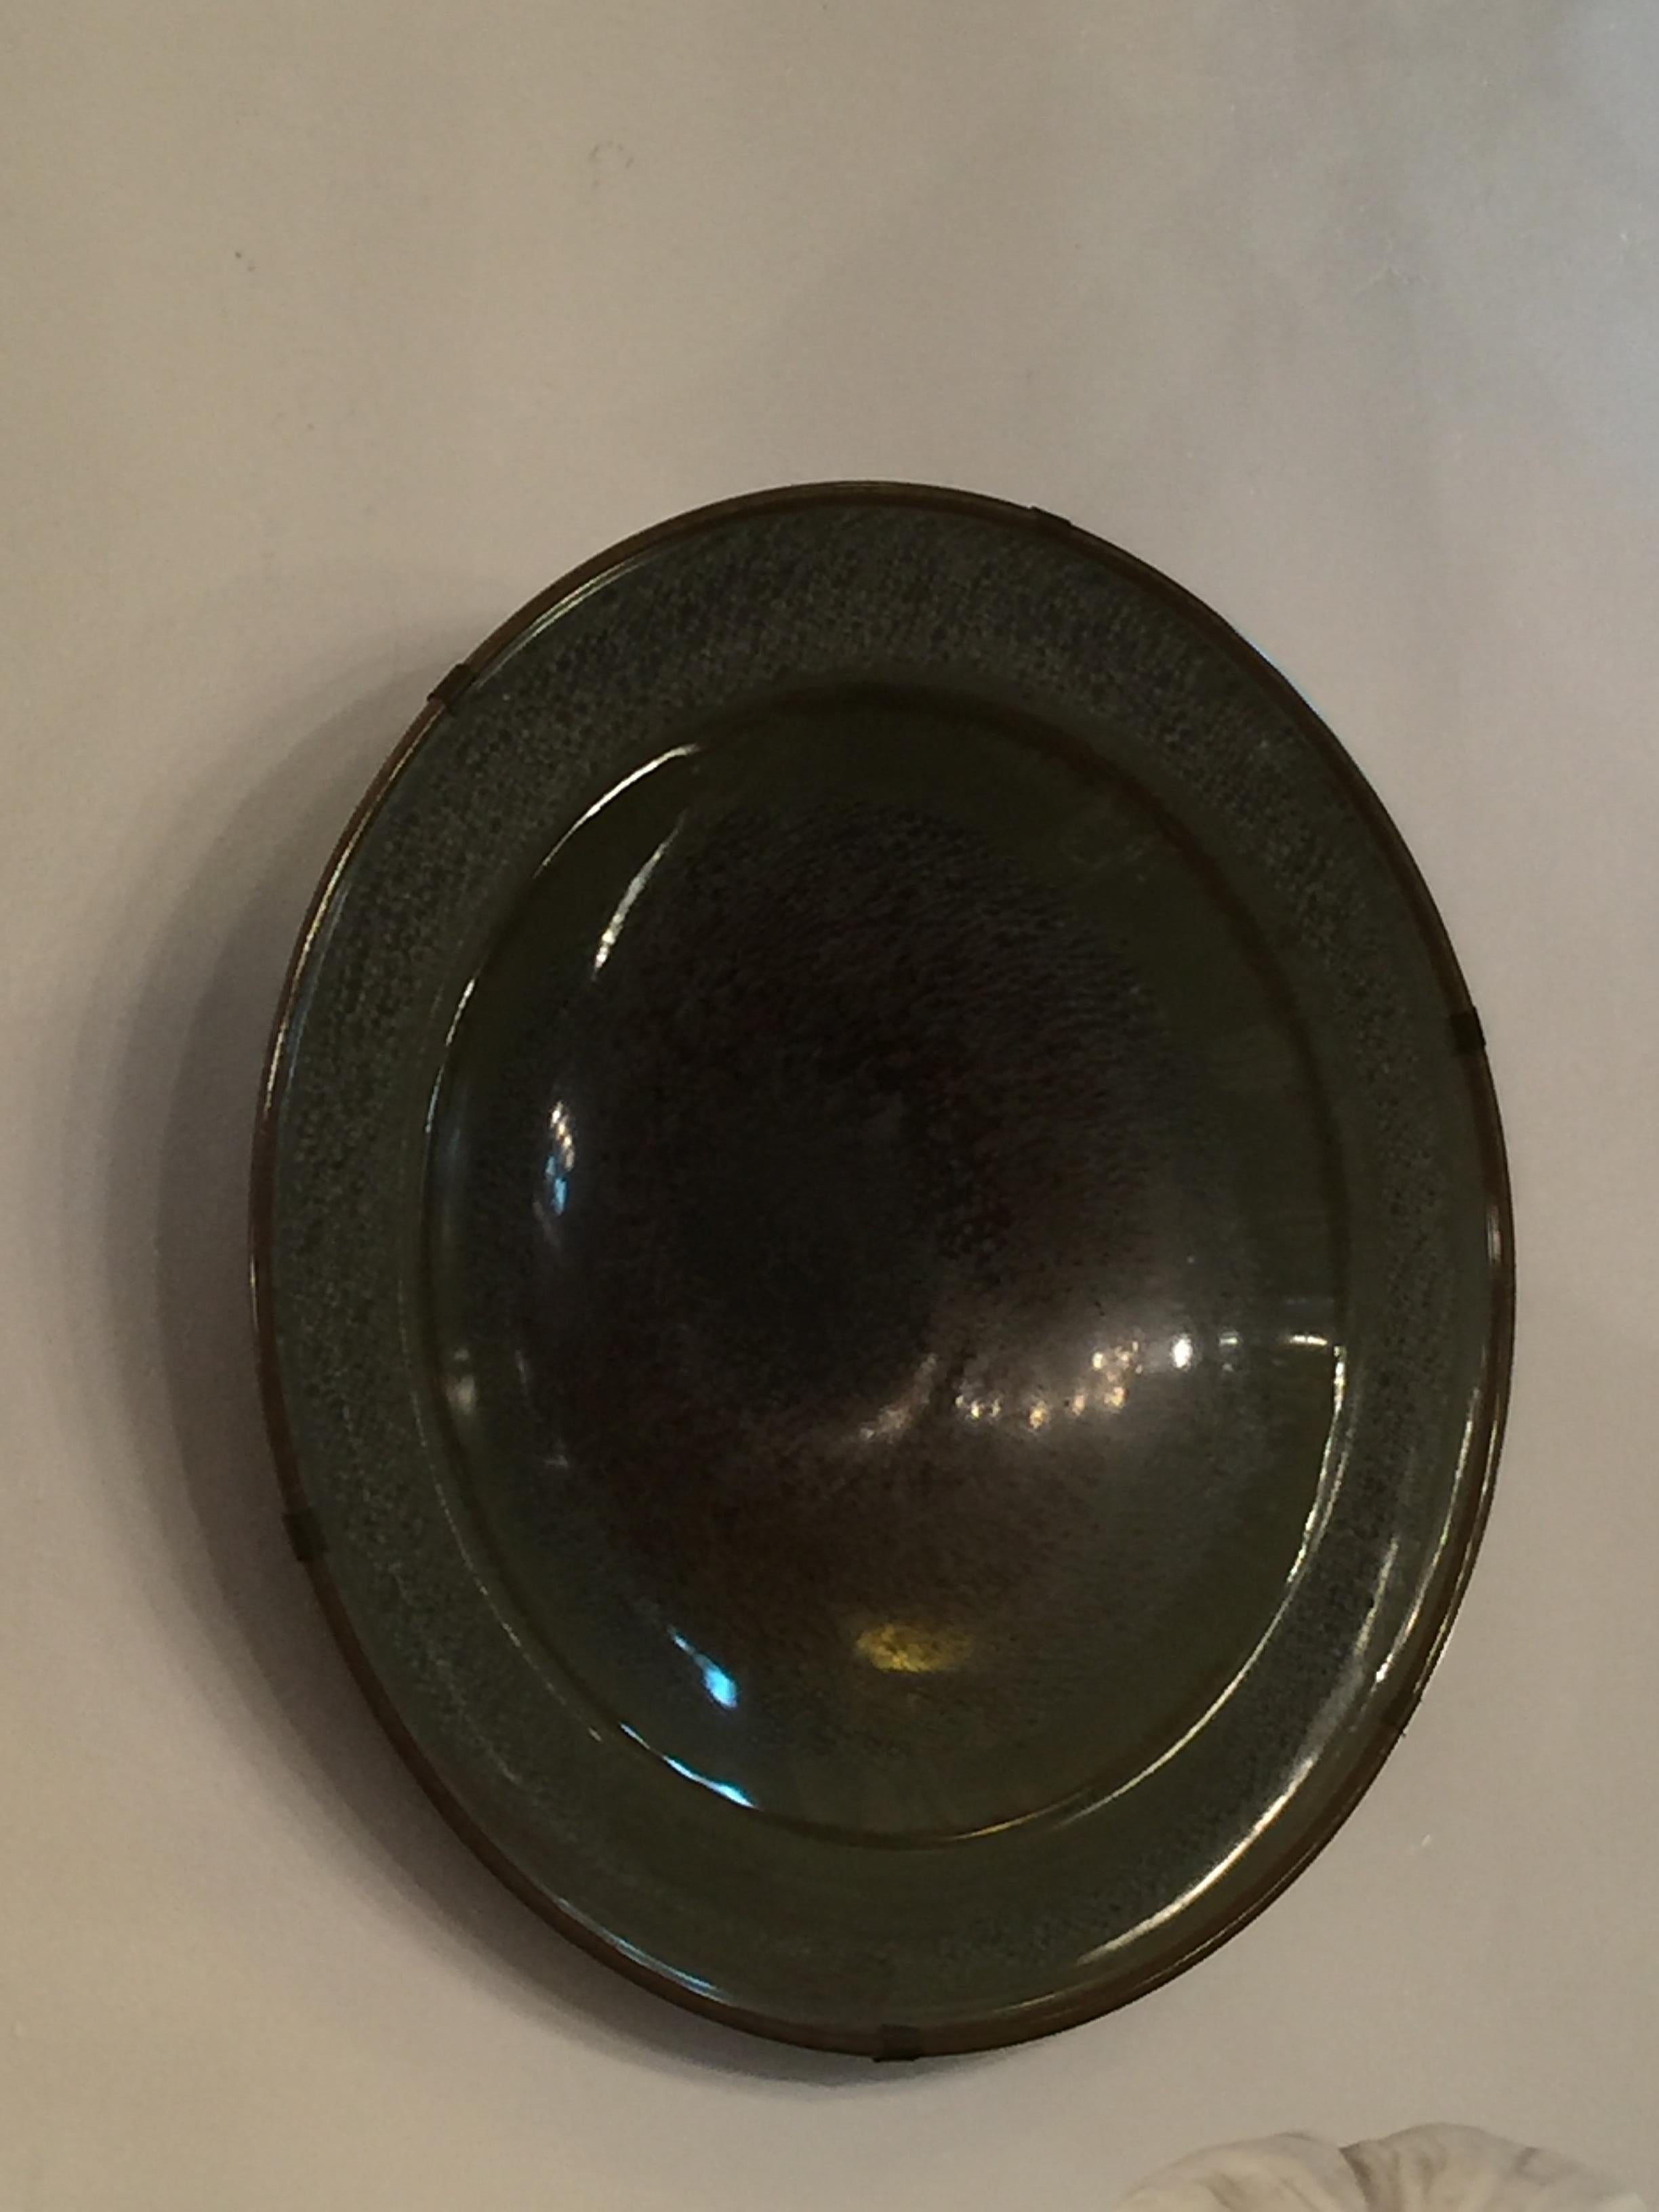 Material: Ceramic
We have specialized in the sale of Art Deco and Art Nouveau and Vintage styles since 1982.If you have any questions we are at your disposal.
Pushing the button that reads 'View All From Seller'. And you can see more objects to